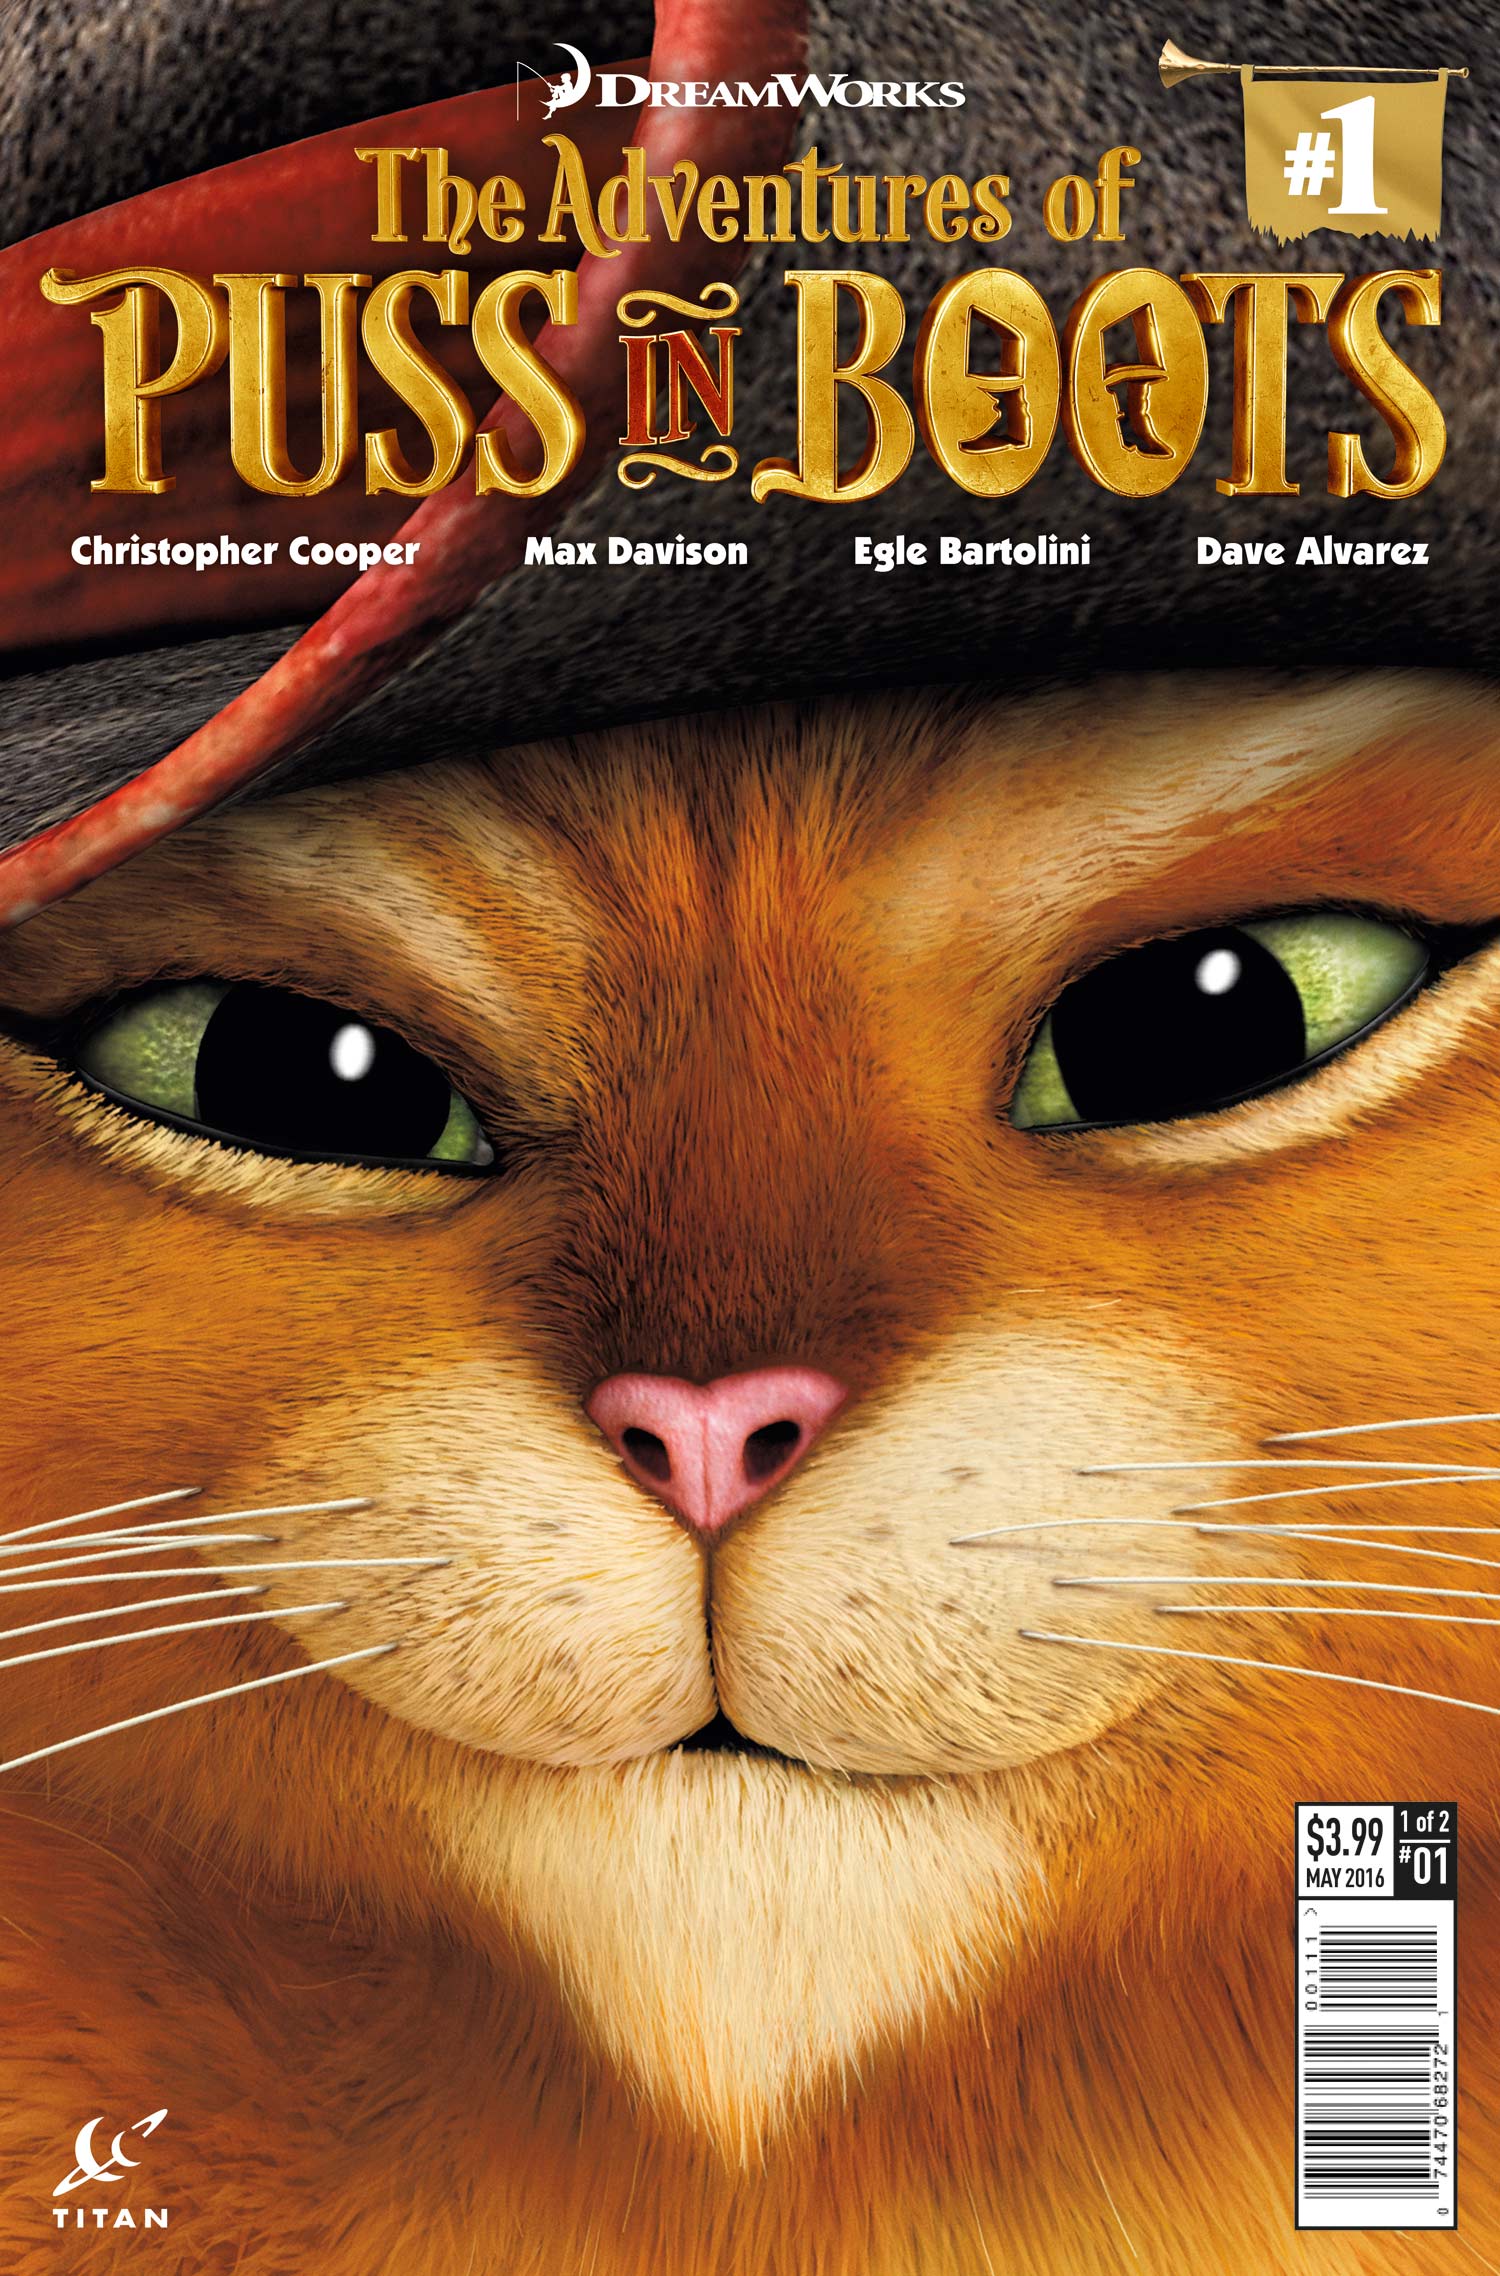 PussInBoots_1_Cover_A